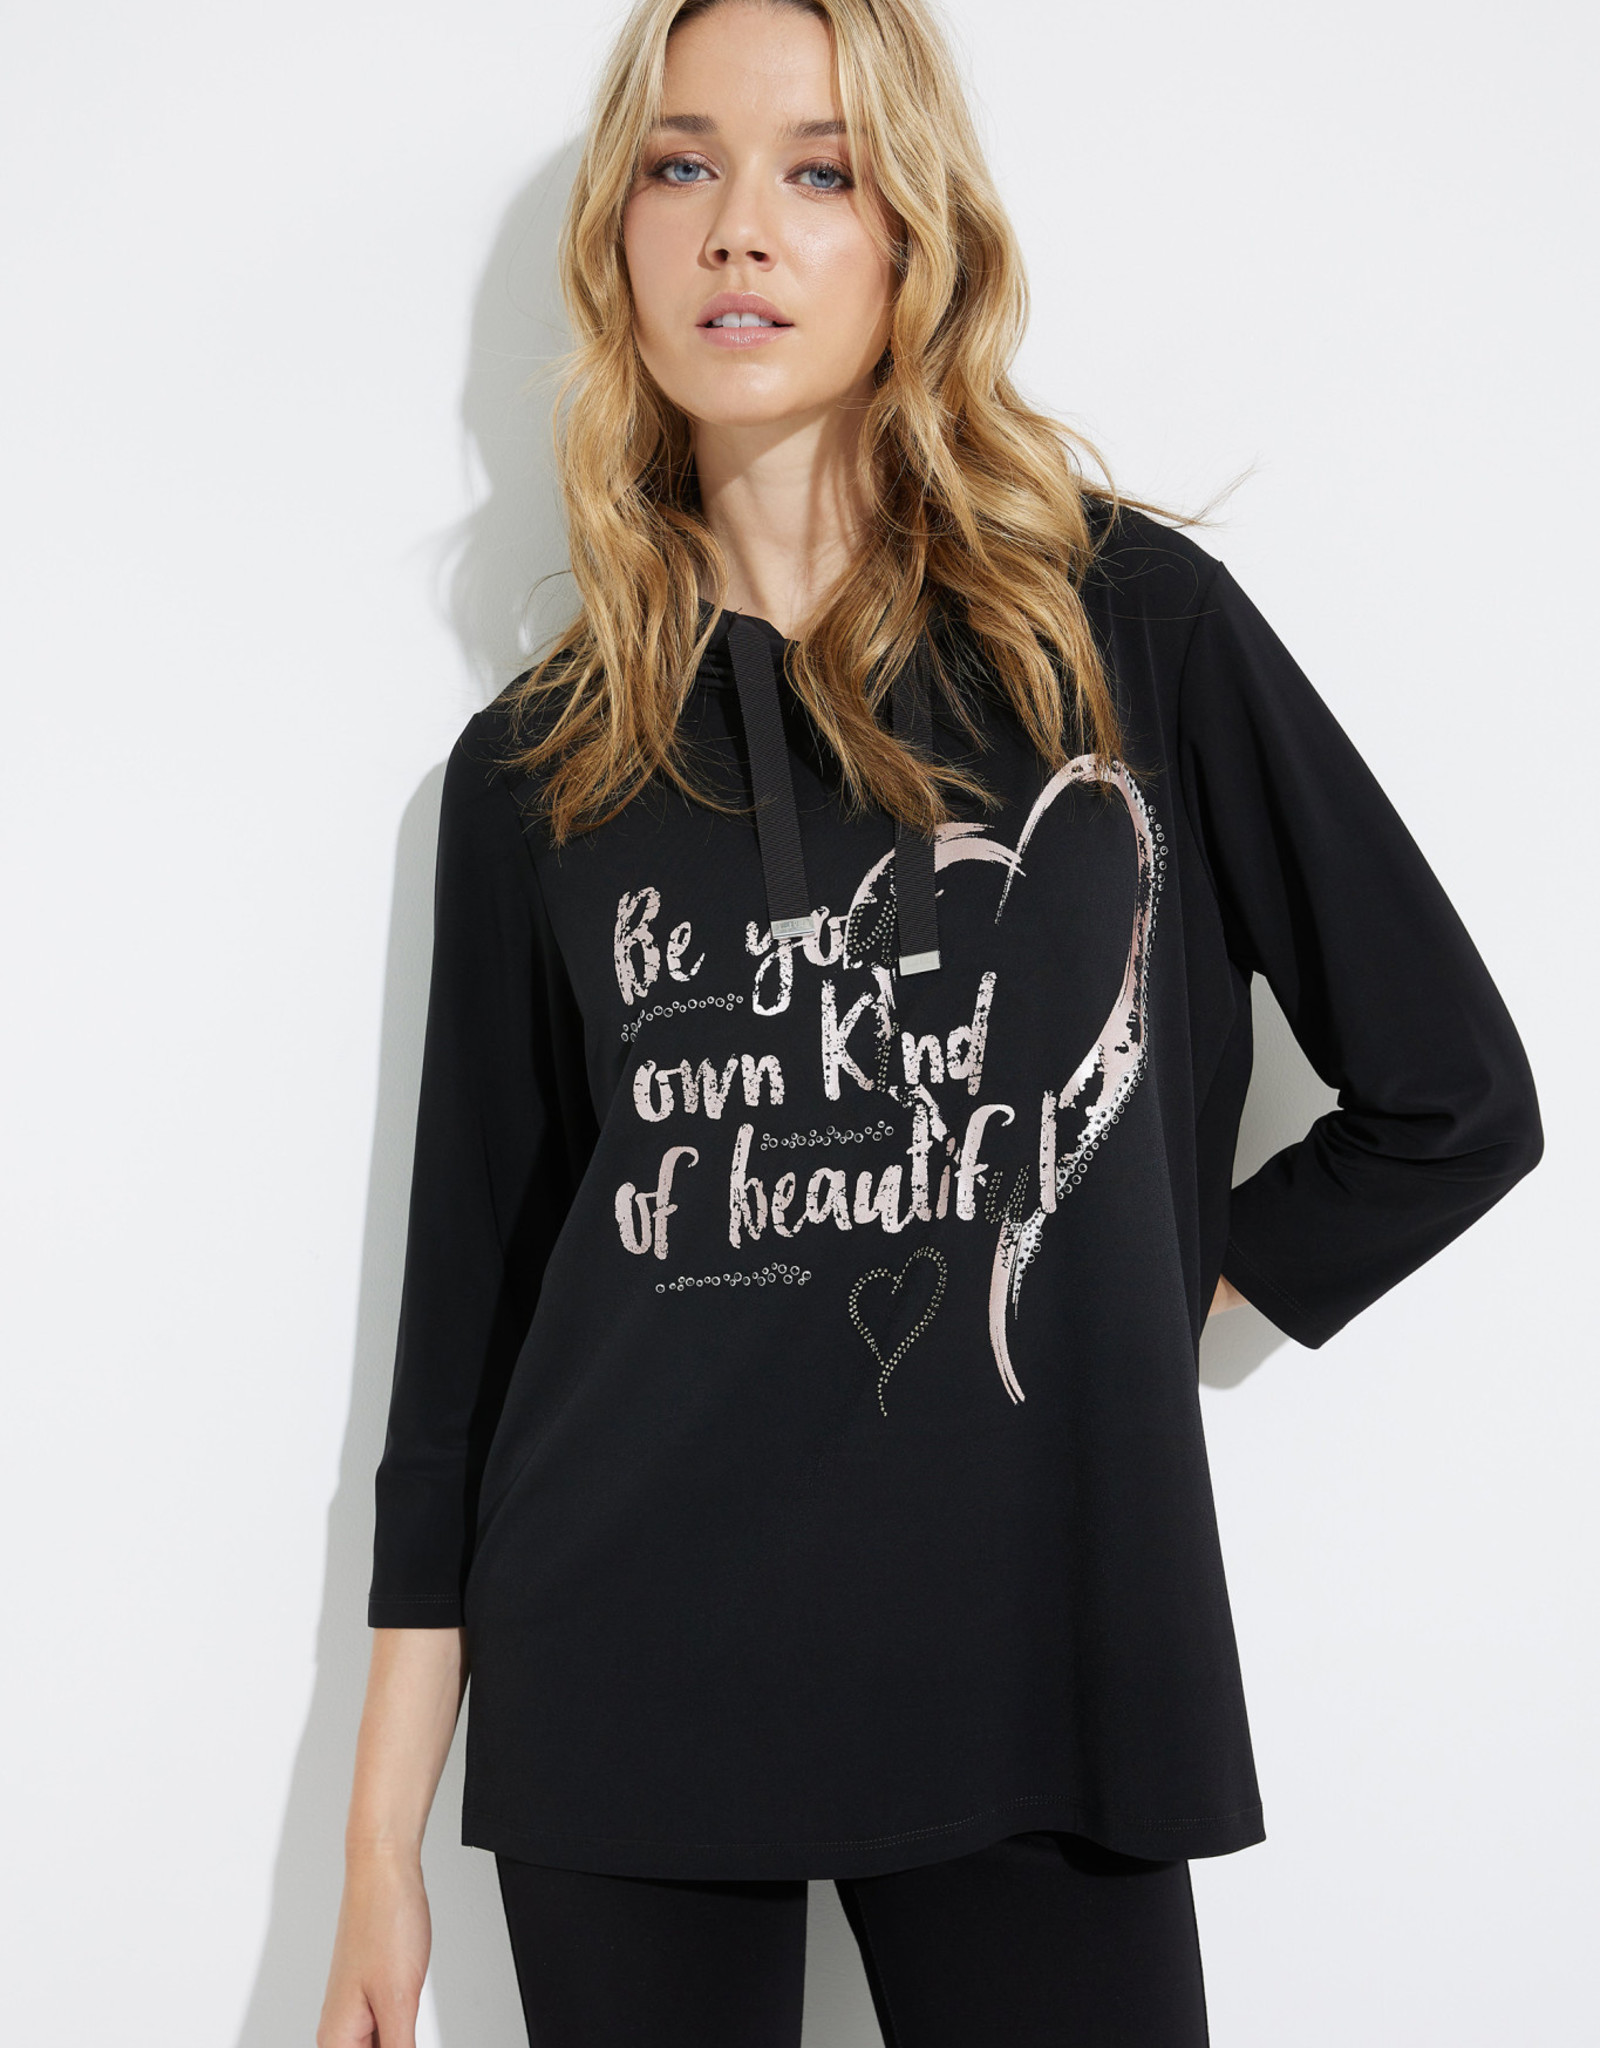 Joseph Ribkoff Black Graphic "Be Your Own Kind of Beautiful" Tunic